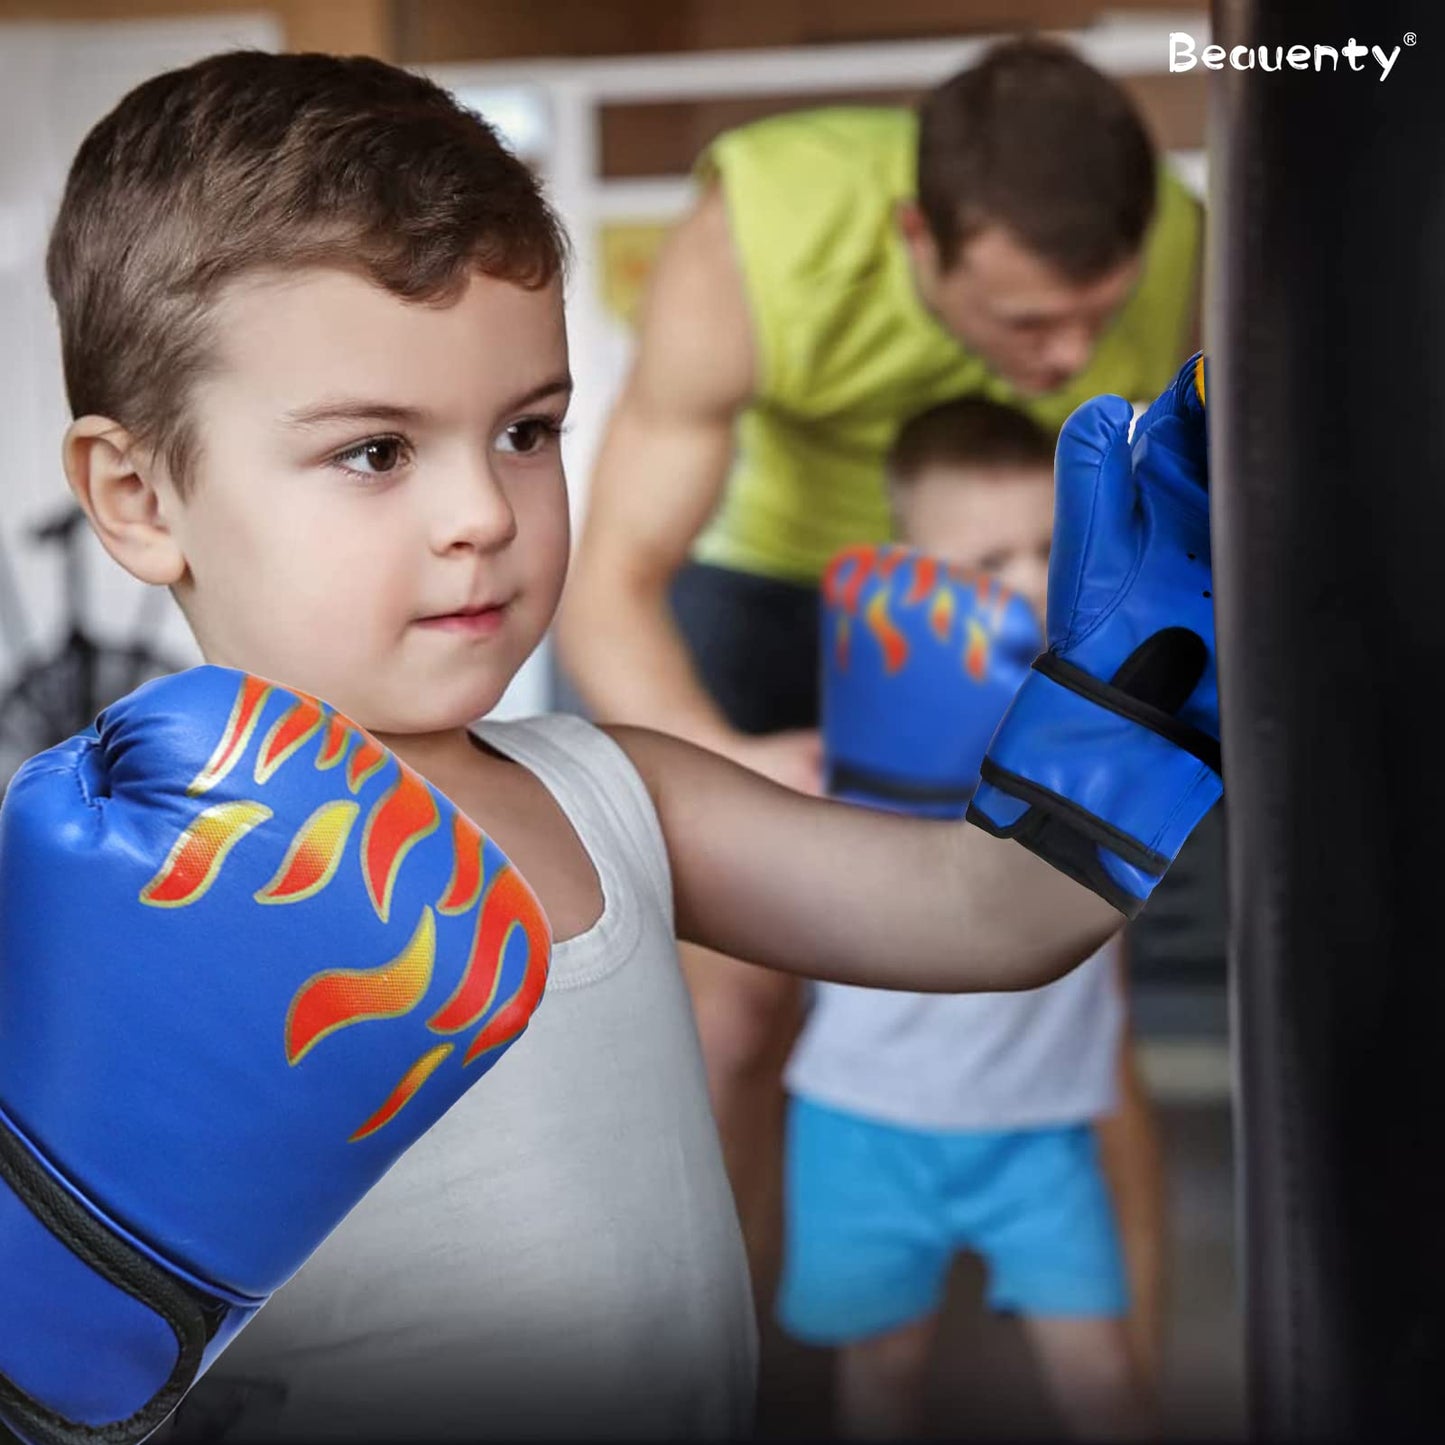 Beauenty Kids Boxing Gloves,Training Gloves Youth and Toddler Boxing Gloves,Ventilated Palm Multi Layered, for Punching Bag Kickboxing Muay Thai Mitts